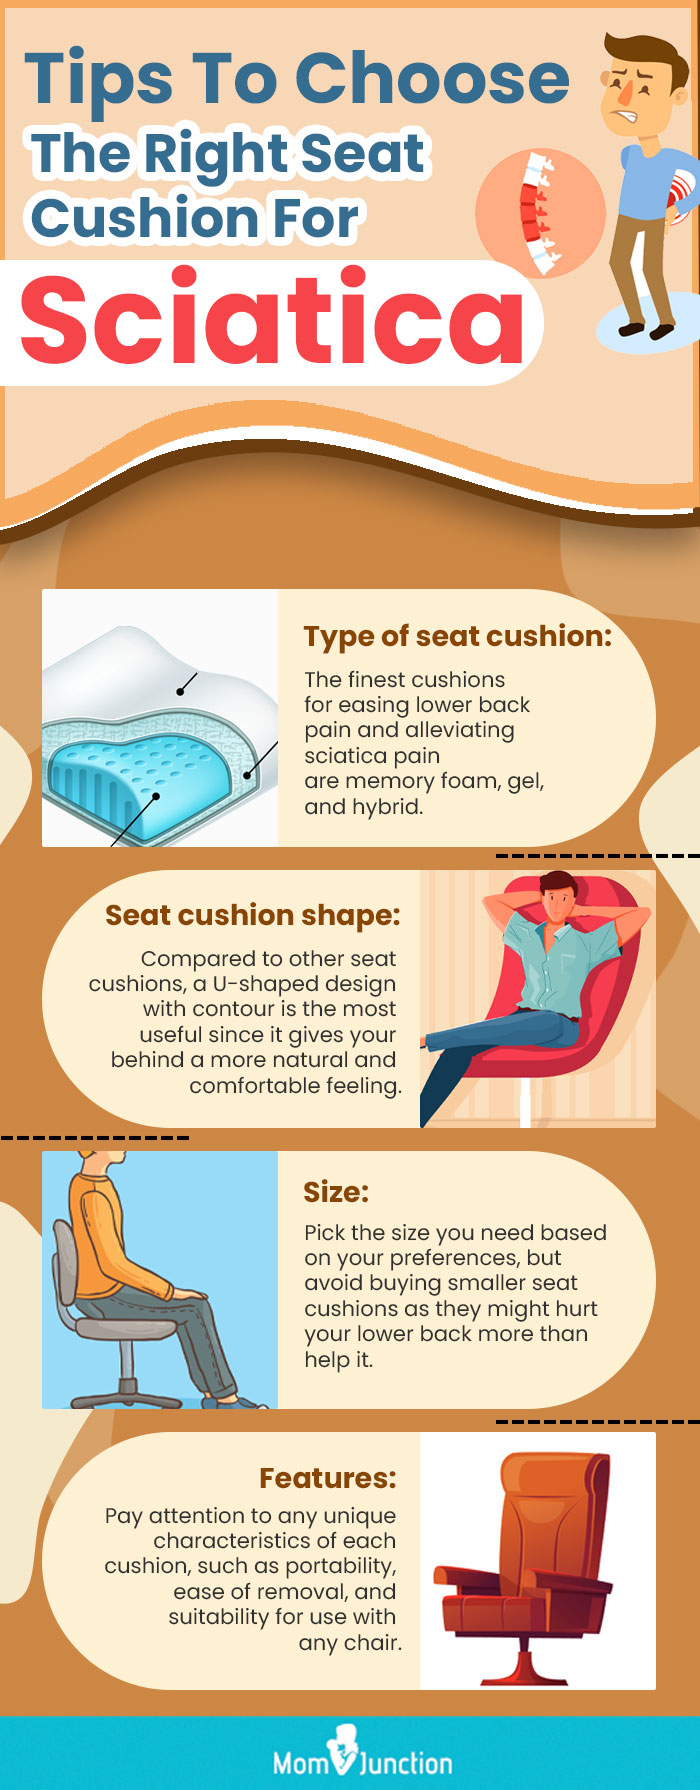 Tips To Choose The Right Seat Cushion For Sciatica